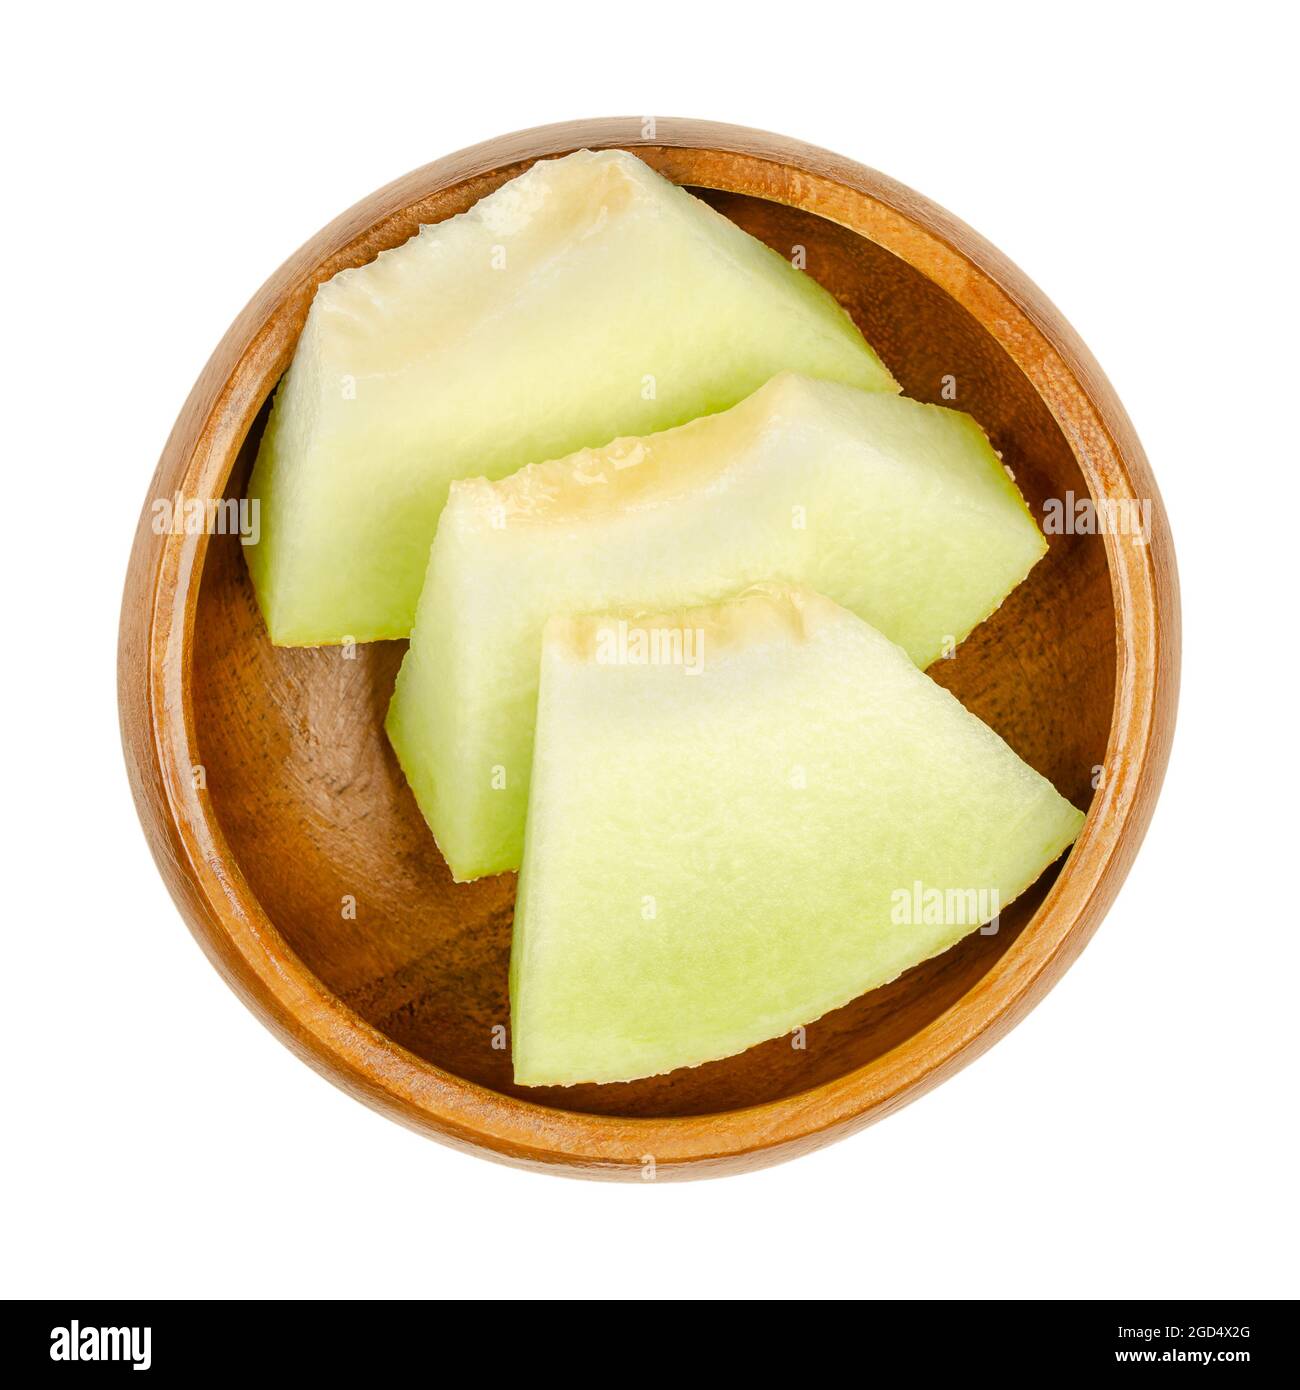 Galia melon slices, in a wooden bowl. Triangular and ready-to-eat pieces of a freshly cut and ripe fruit of Cucumis melo var. reticulatus. Stock Photo